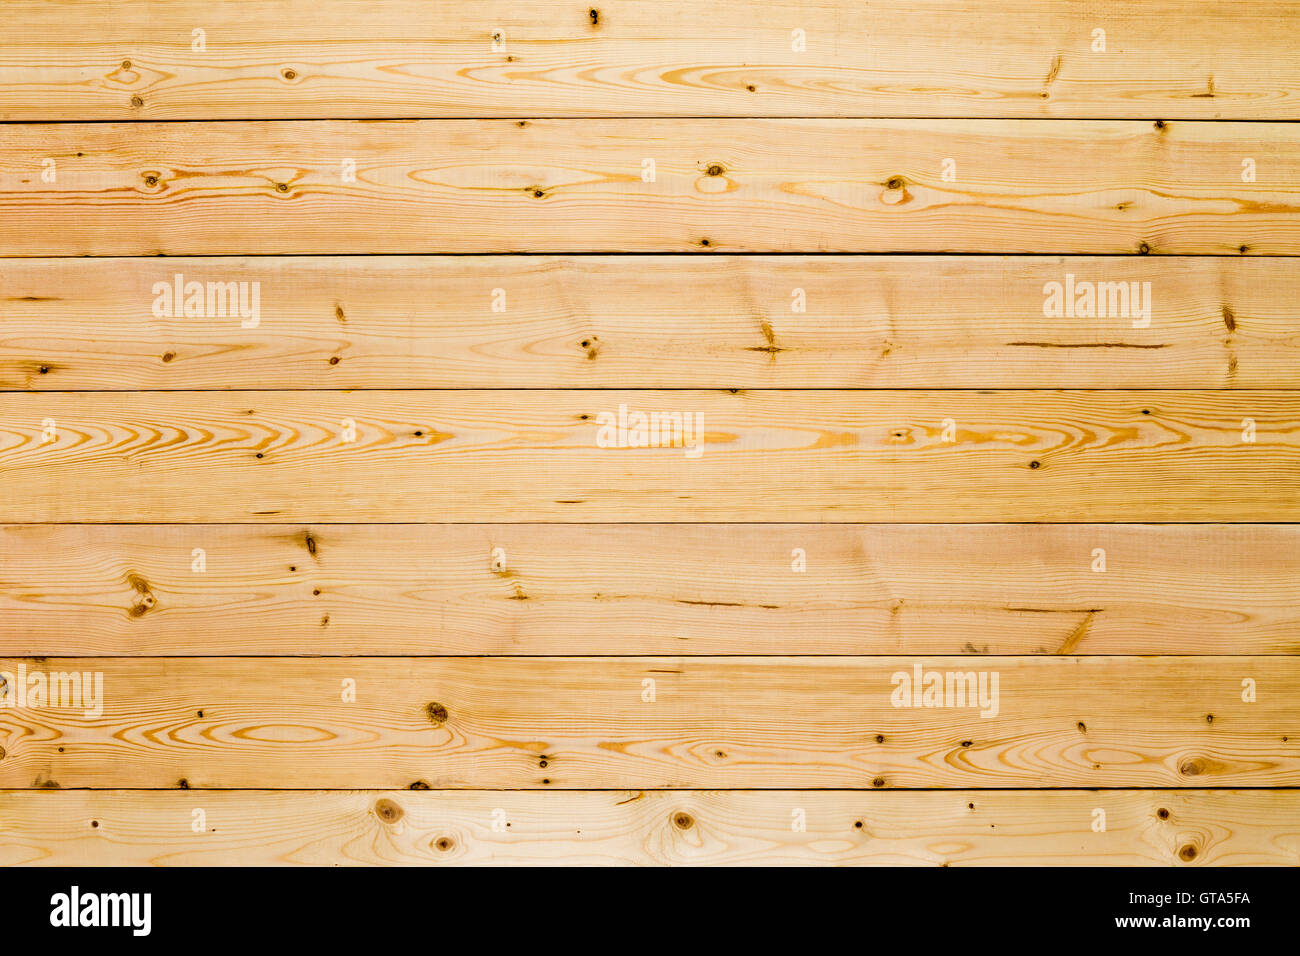 Plain clean natural wooden boards or panel background texture in an overhead full frame view Stock Photo